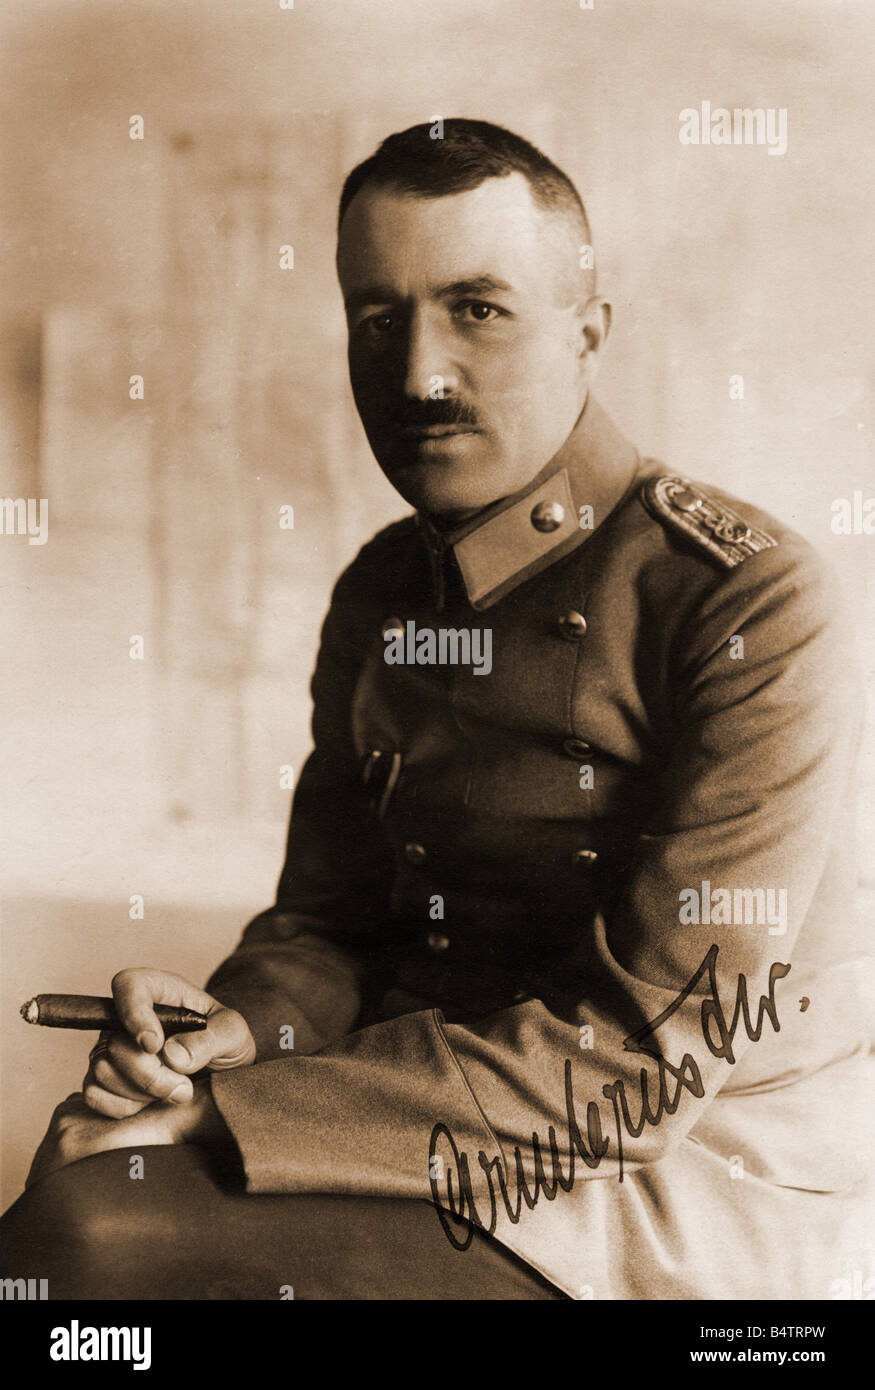 events, First World War / WWI, military, soldiers, German lieutenant, sitting, half length, Germany, 20th century, uniform, officer, officers, smikong, cigar, moustache, historic, historical, uniforms, cavalry, people, 1910s, Stock Photo